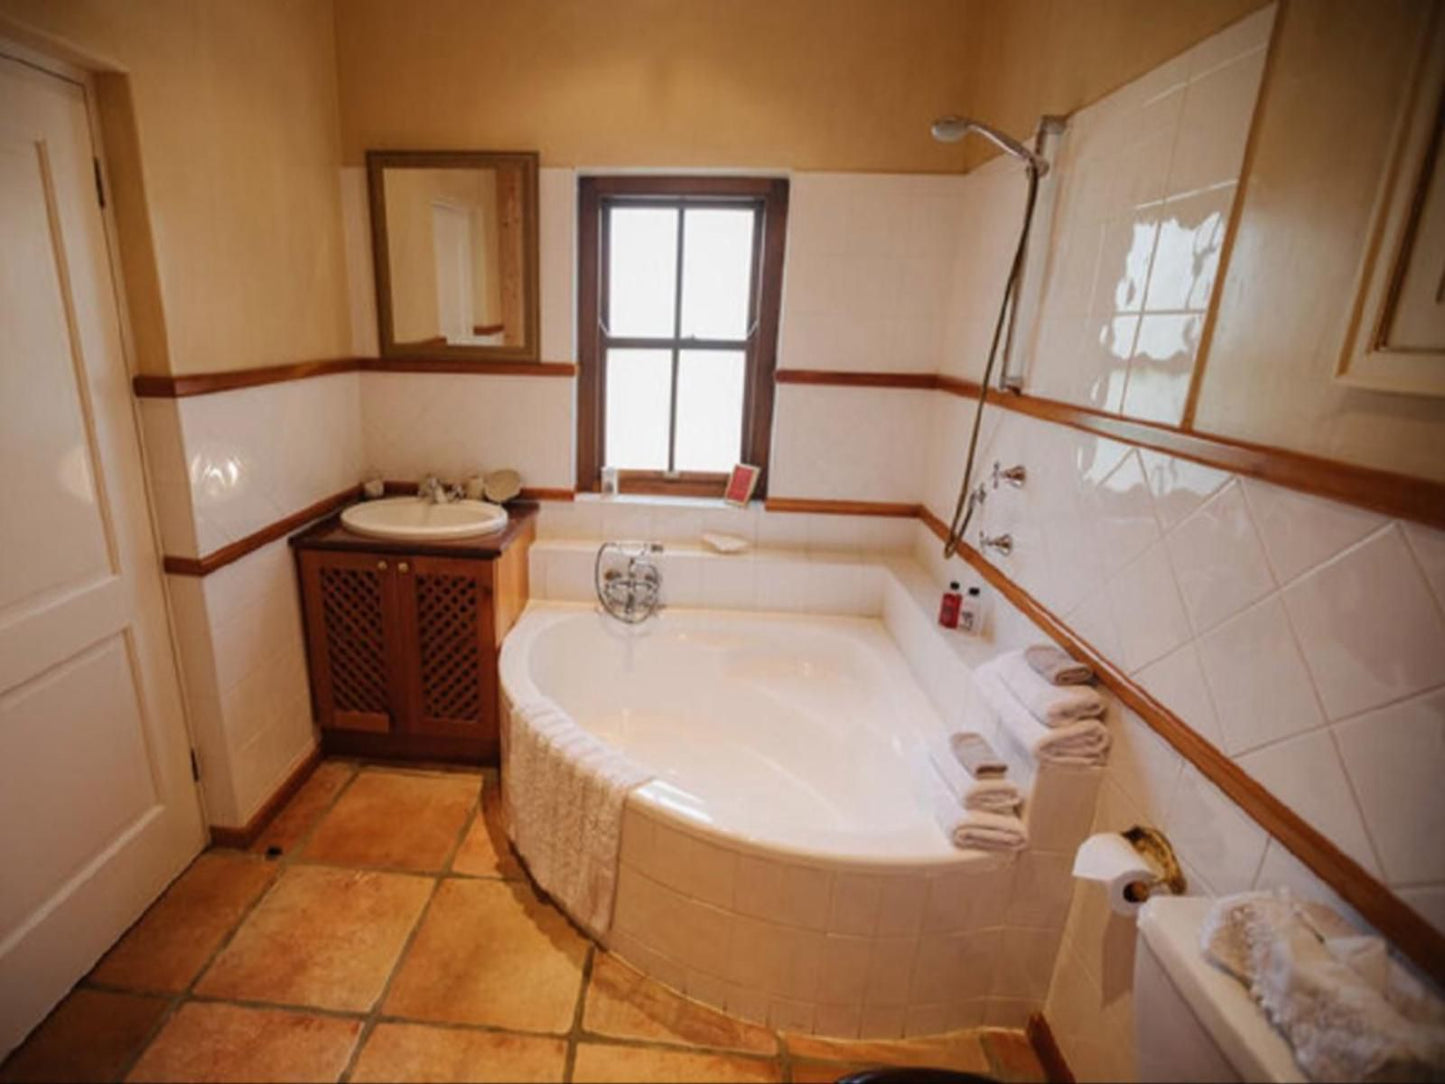 High Timbers Lodge Tokai Cape Town Western Cape South Africa Bathroom, Swimming Pool